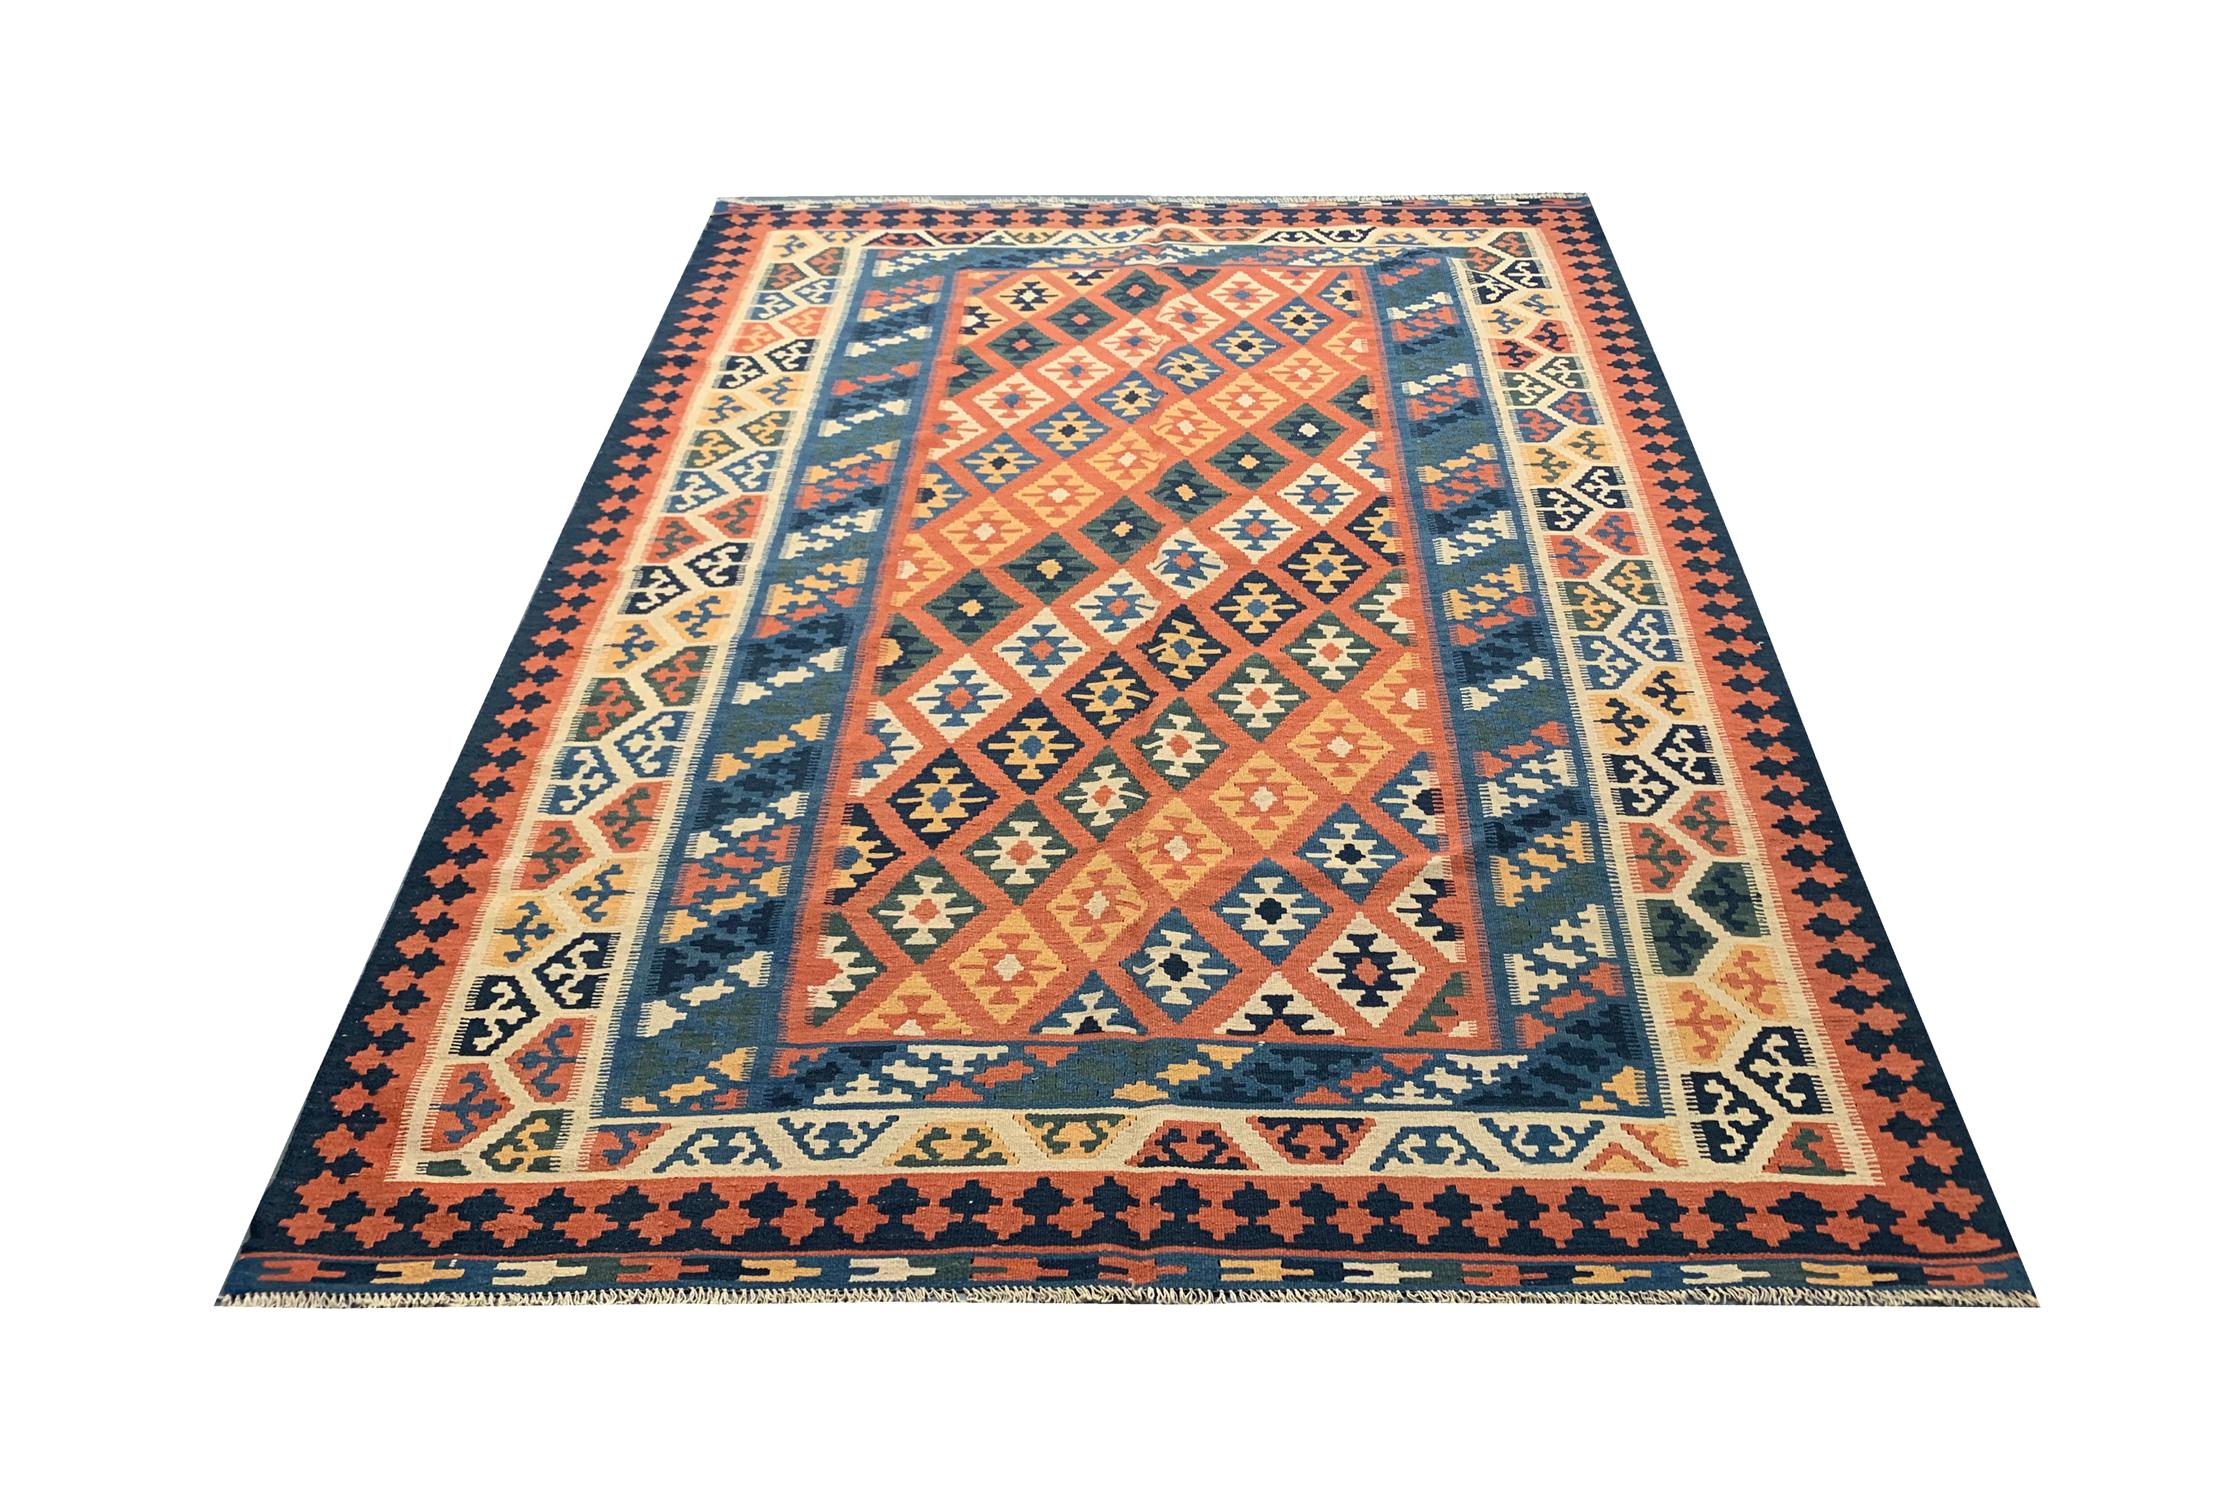 Beautiful vintage Caucasia Kilim rug, woven in the 1960s with a fantastic diamond pattern and multi-layered border. Orange, blue and cream are just some of the vibrant colors included, making it the perfect accent rug constructed with hand-spun wool